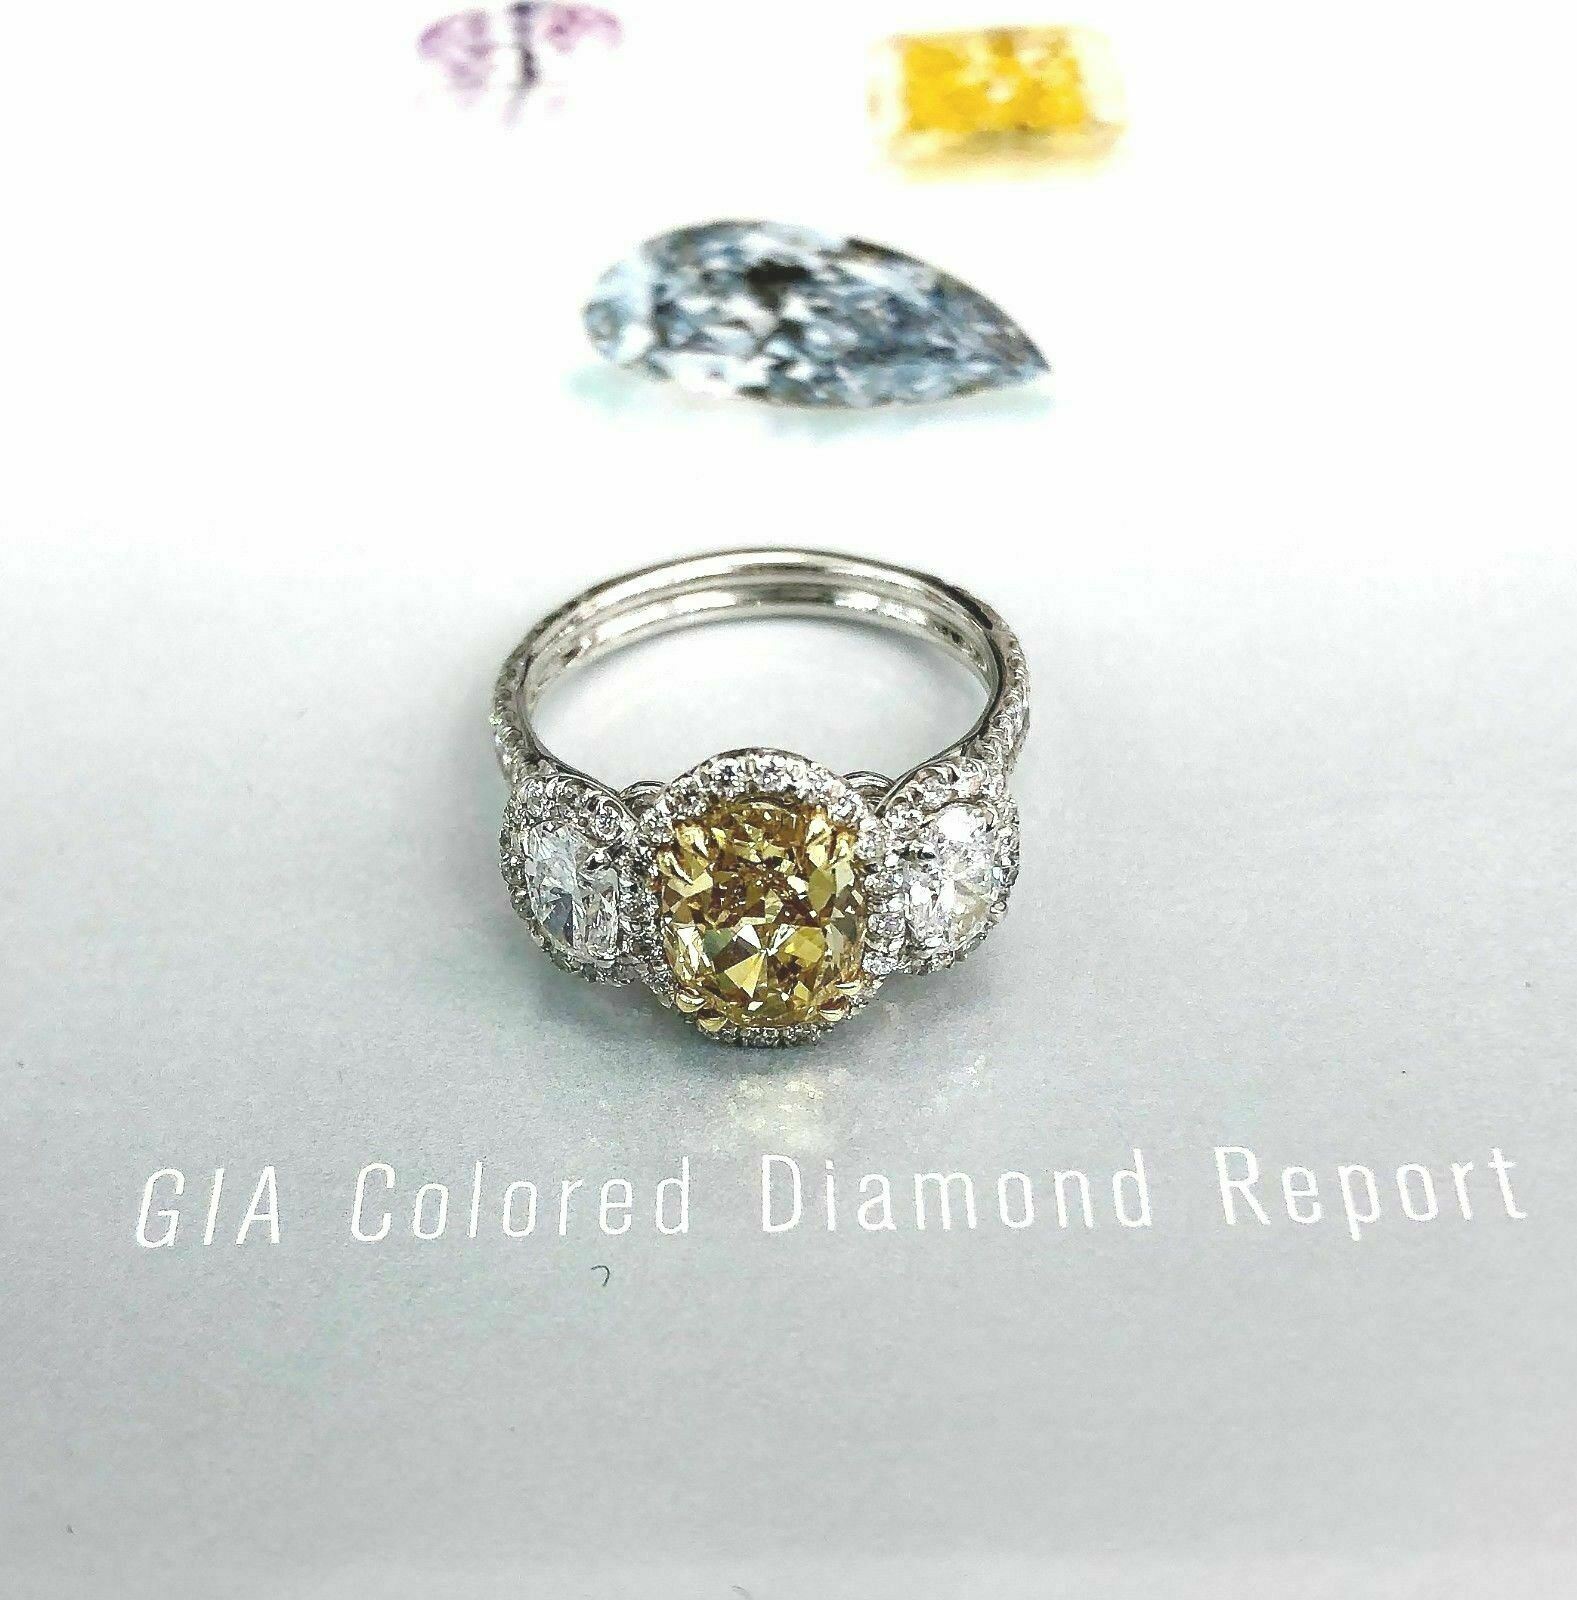 Natural 1.56 Carats GIA Fancy Intense Oval Diamond Ring w Additional 1.32 Carats